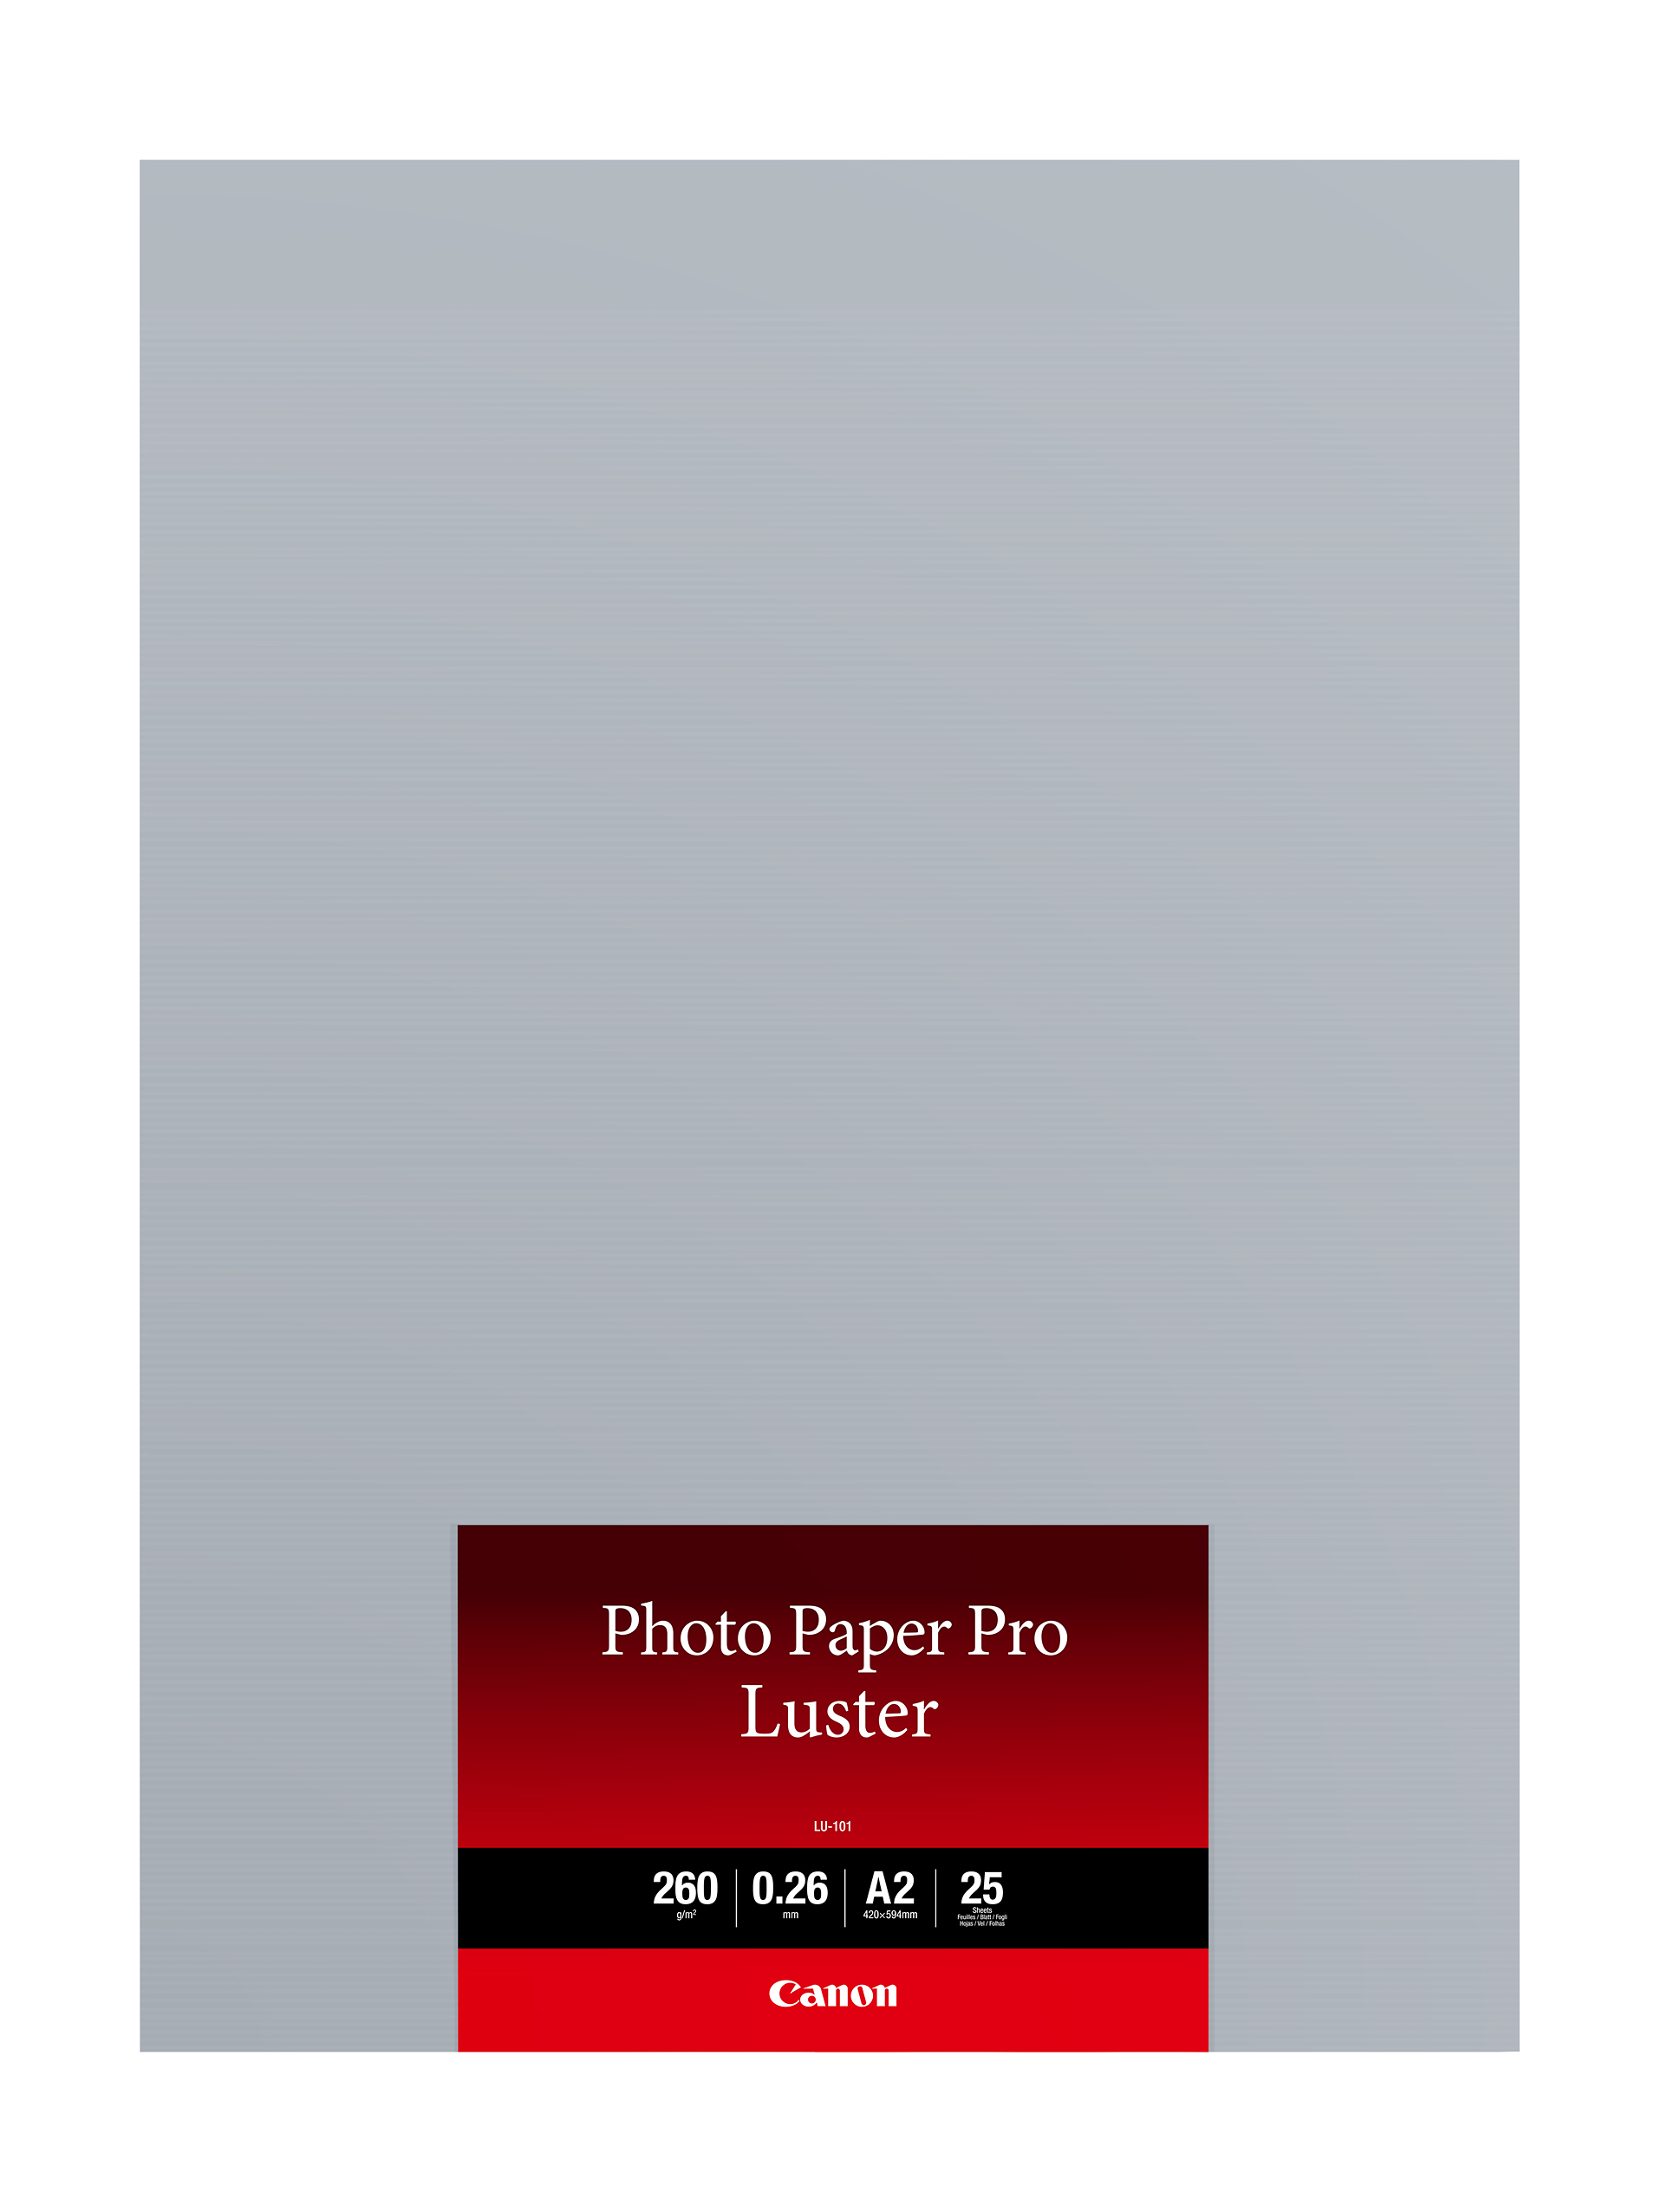 CANON Photo Paper Pro Luster A2 LU101A2 InkJet 260g 25 feuilles